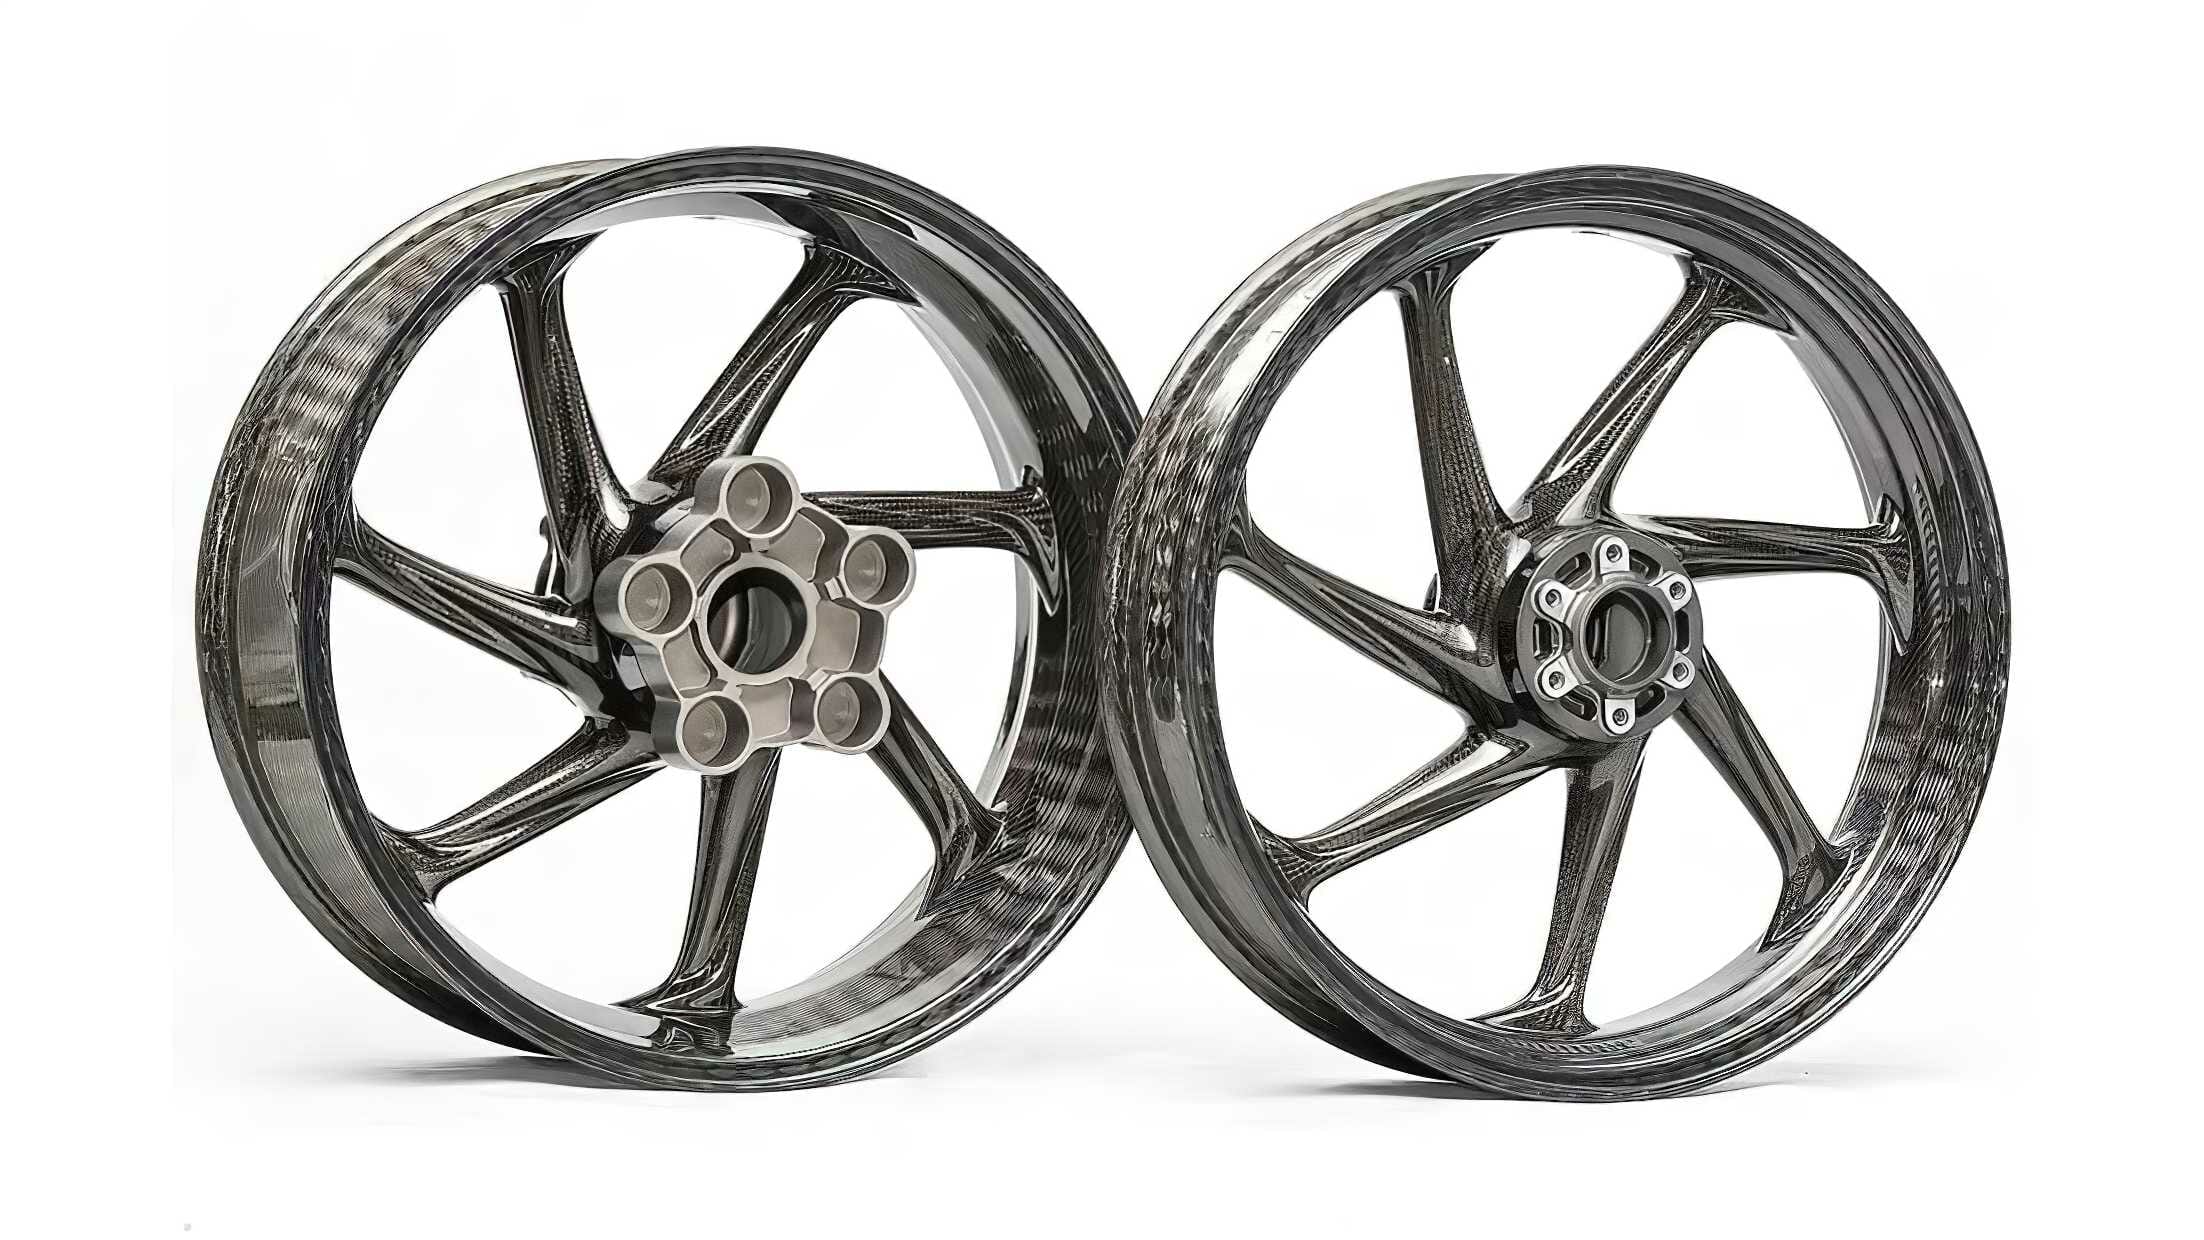 Carbon wheels for RSV4 and Tuono
- also in the MOTORCYCLES.NEWS APP